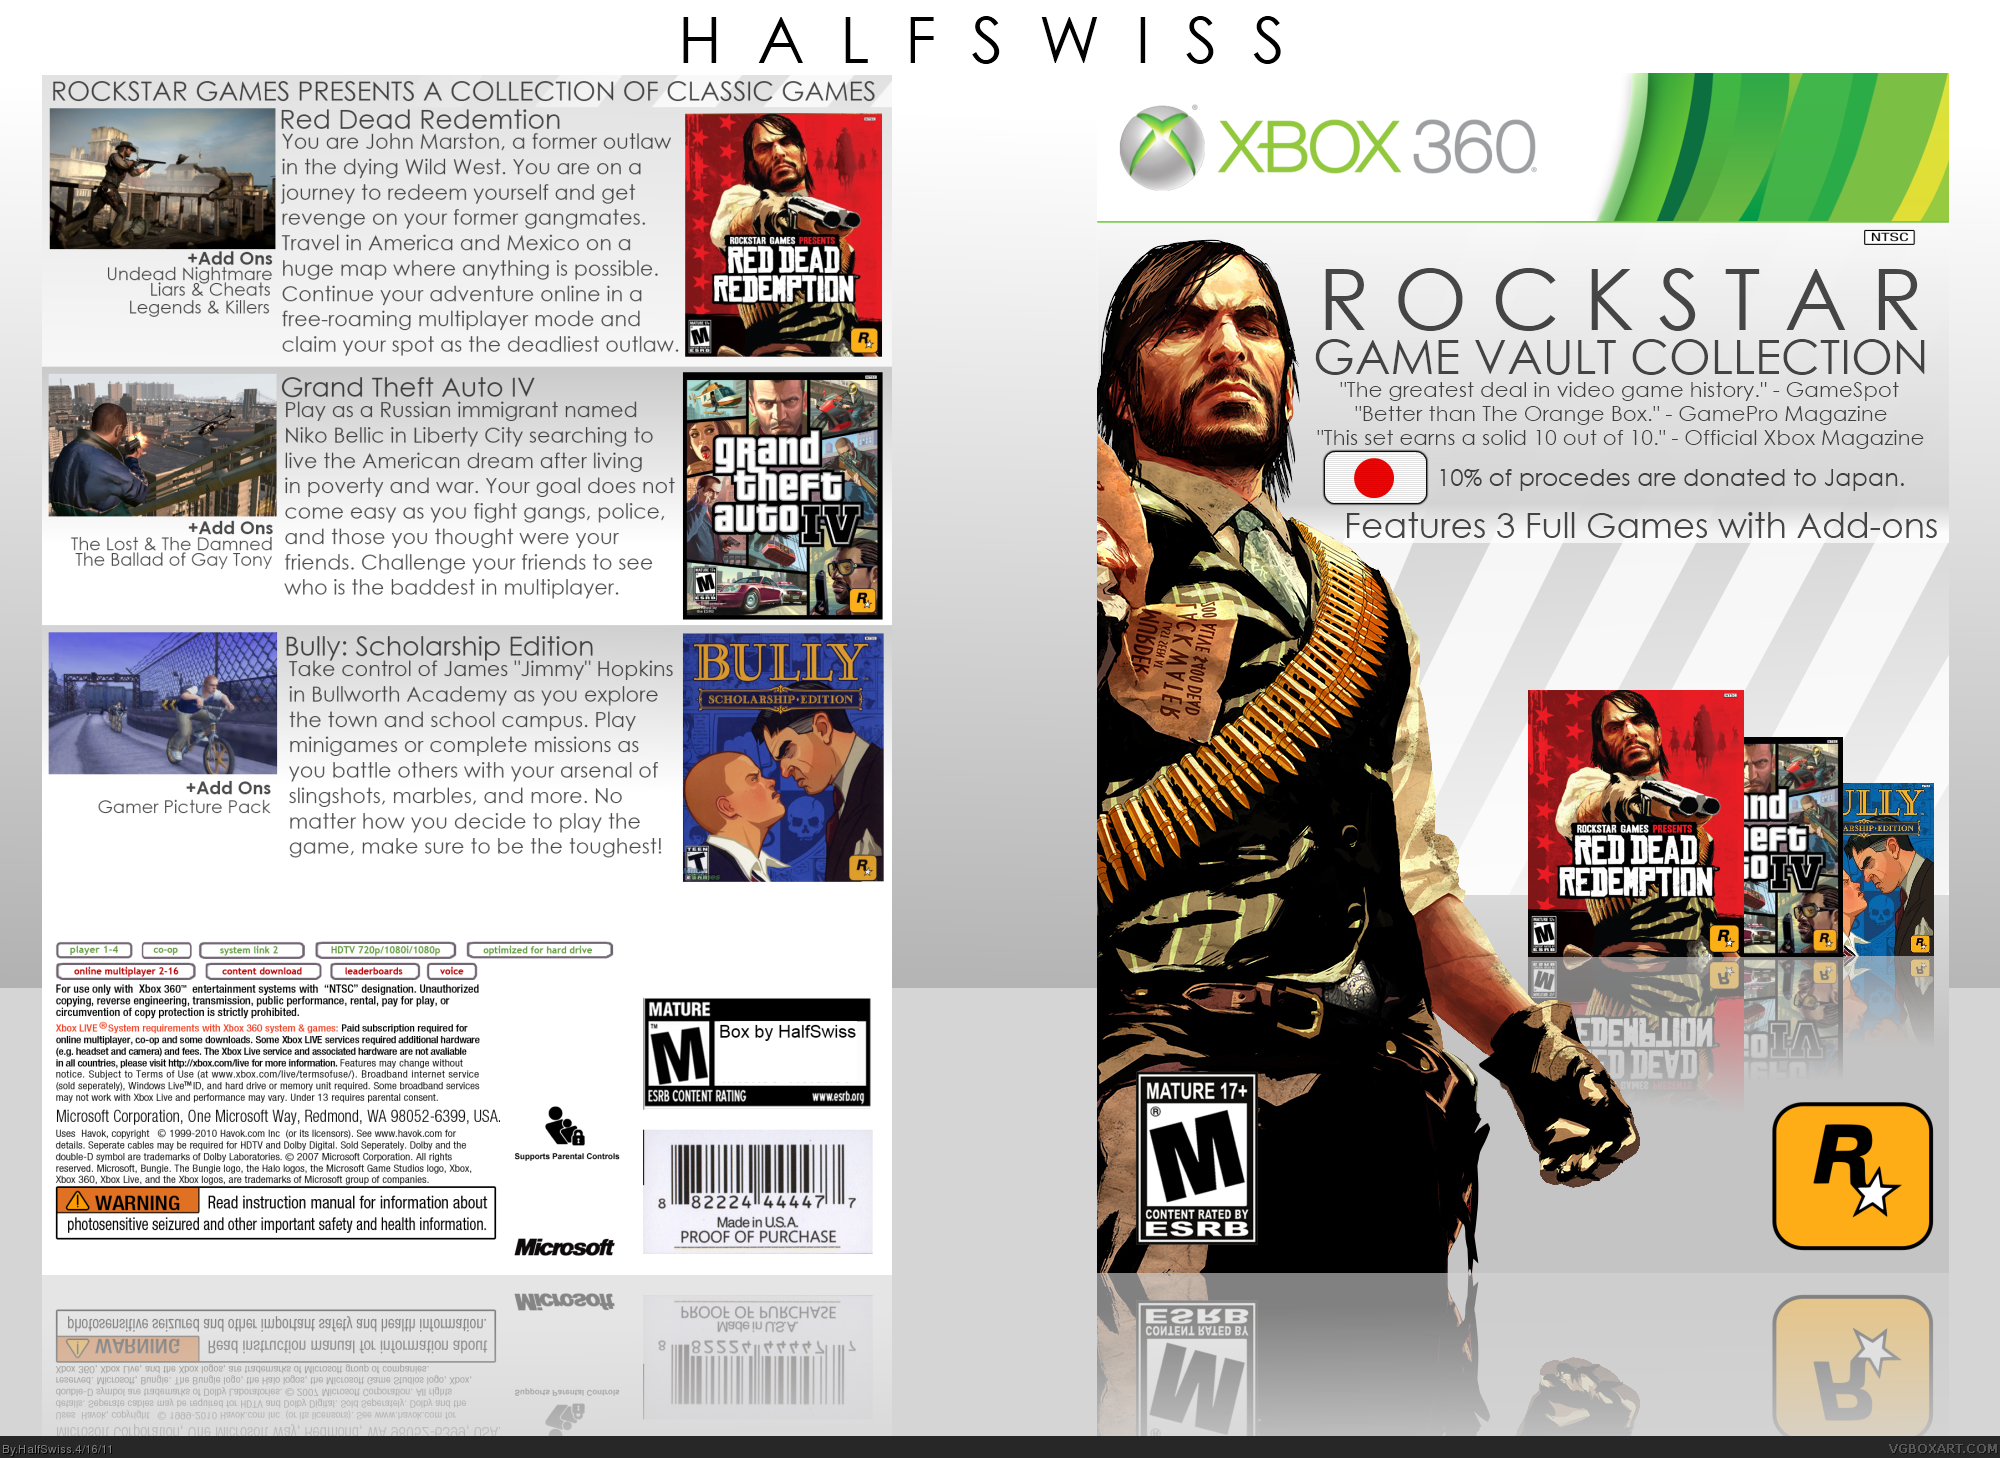 Rockstar: Game Vault Collection box cover